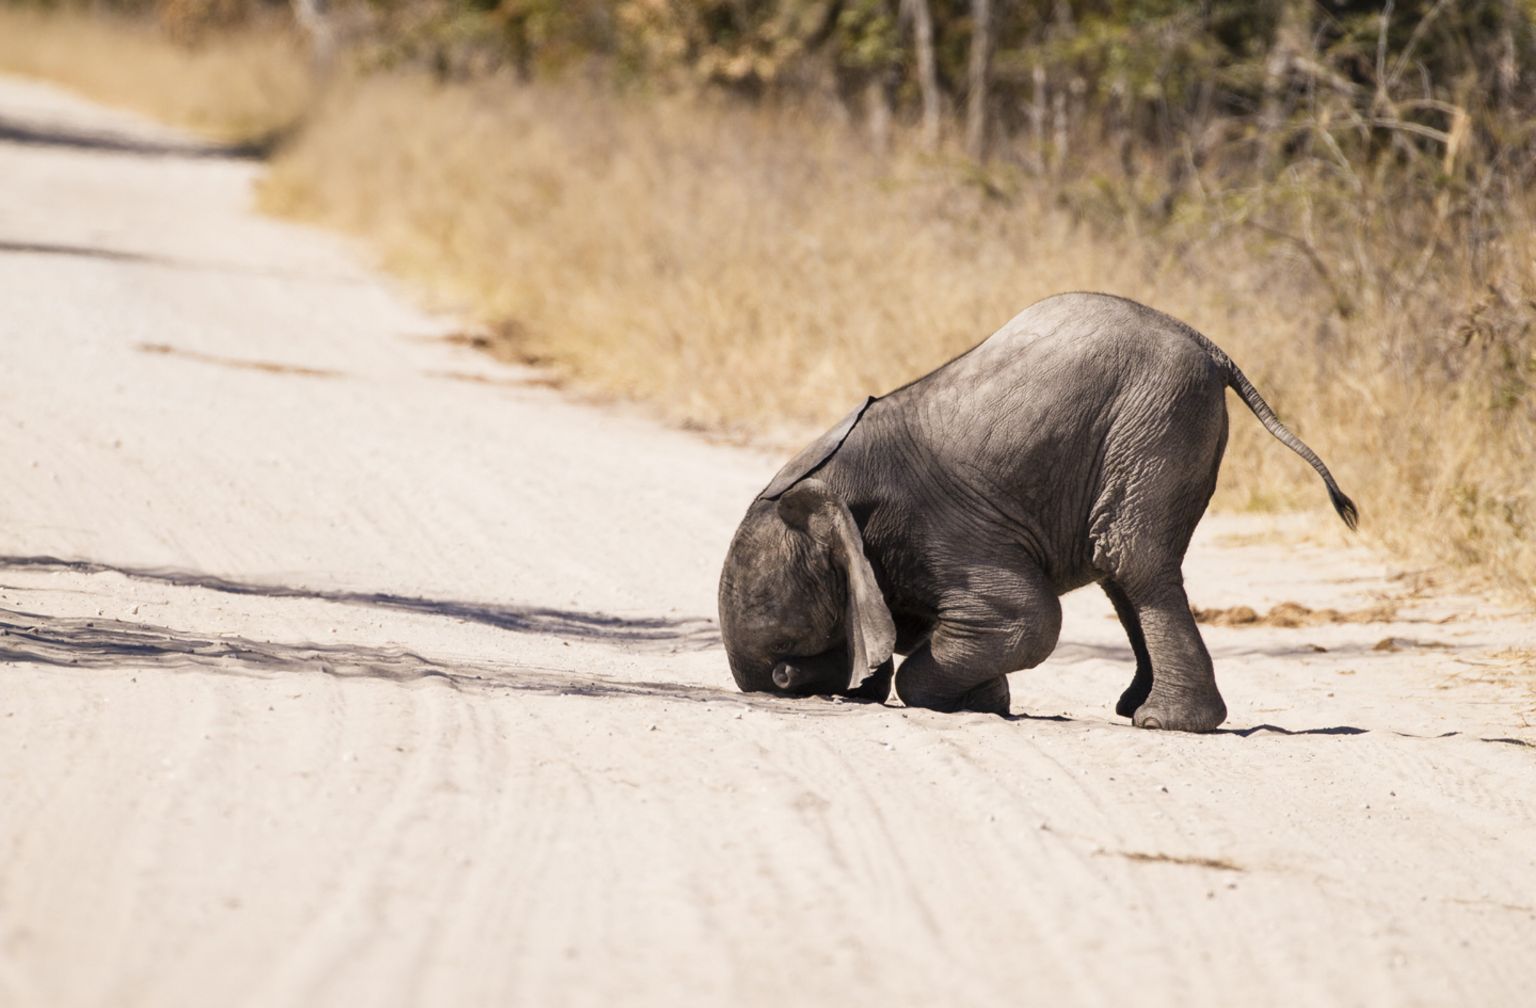 Elephant "face-planting" a road